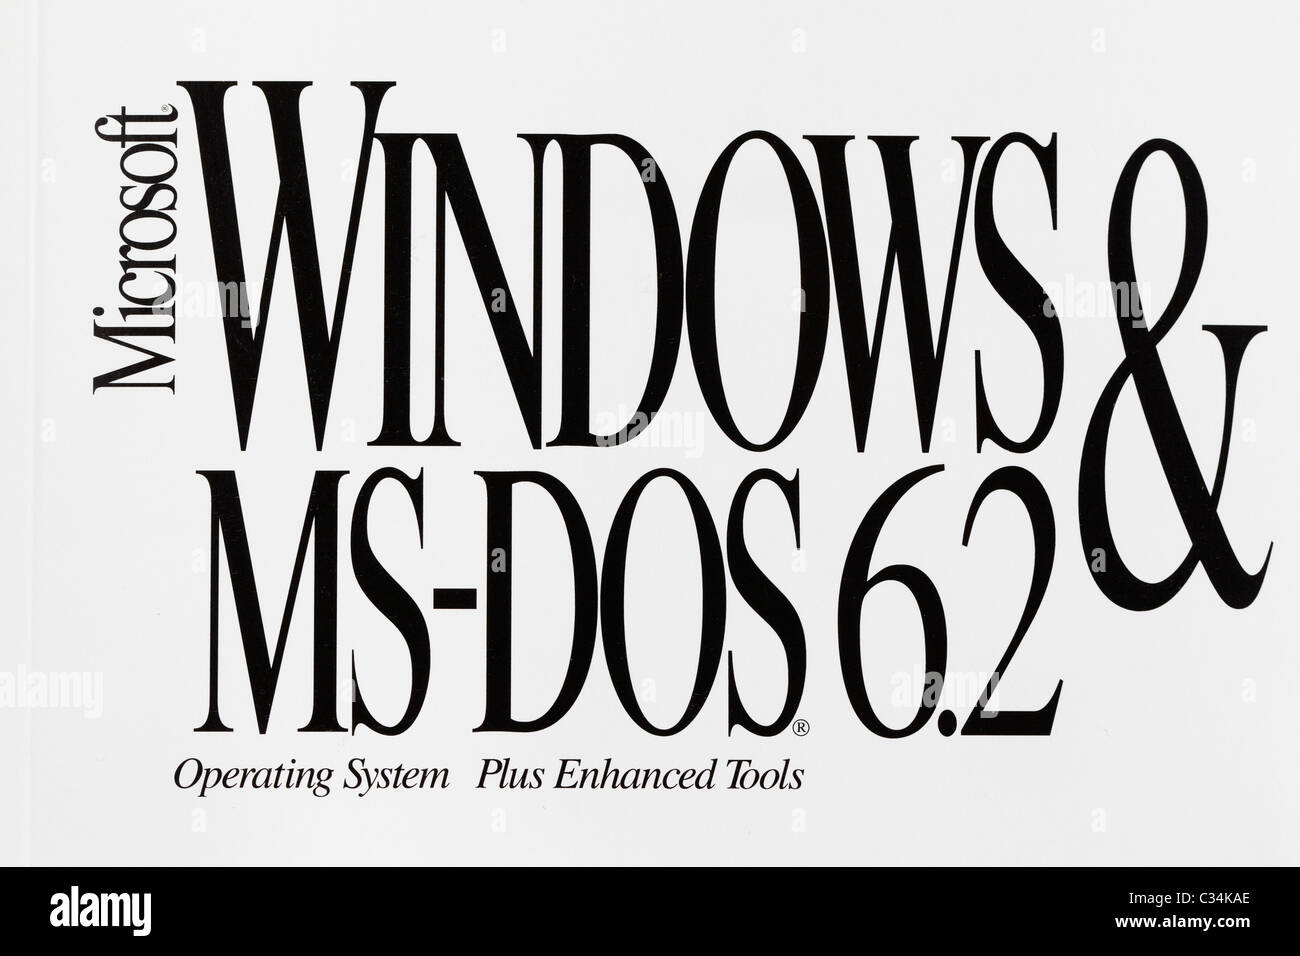 Close up detail of an old Microsoft Windows and MS-DOS version 6.2 manual, circa early 1990's. Stock Photo